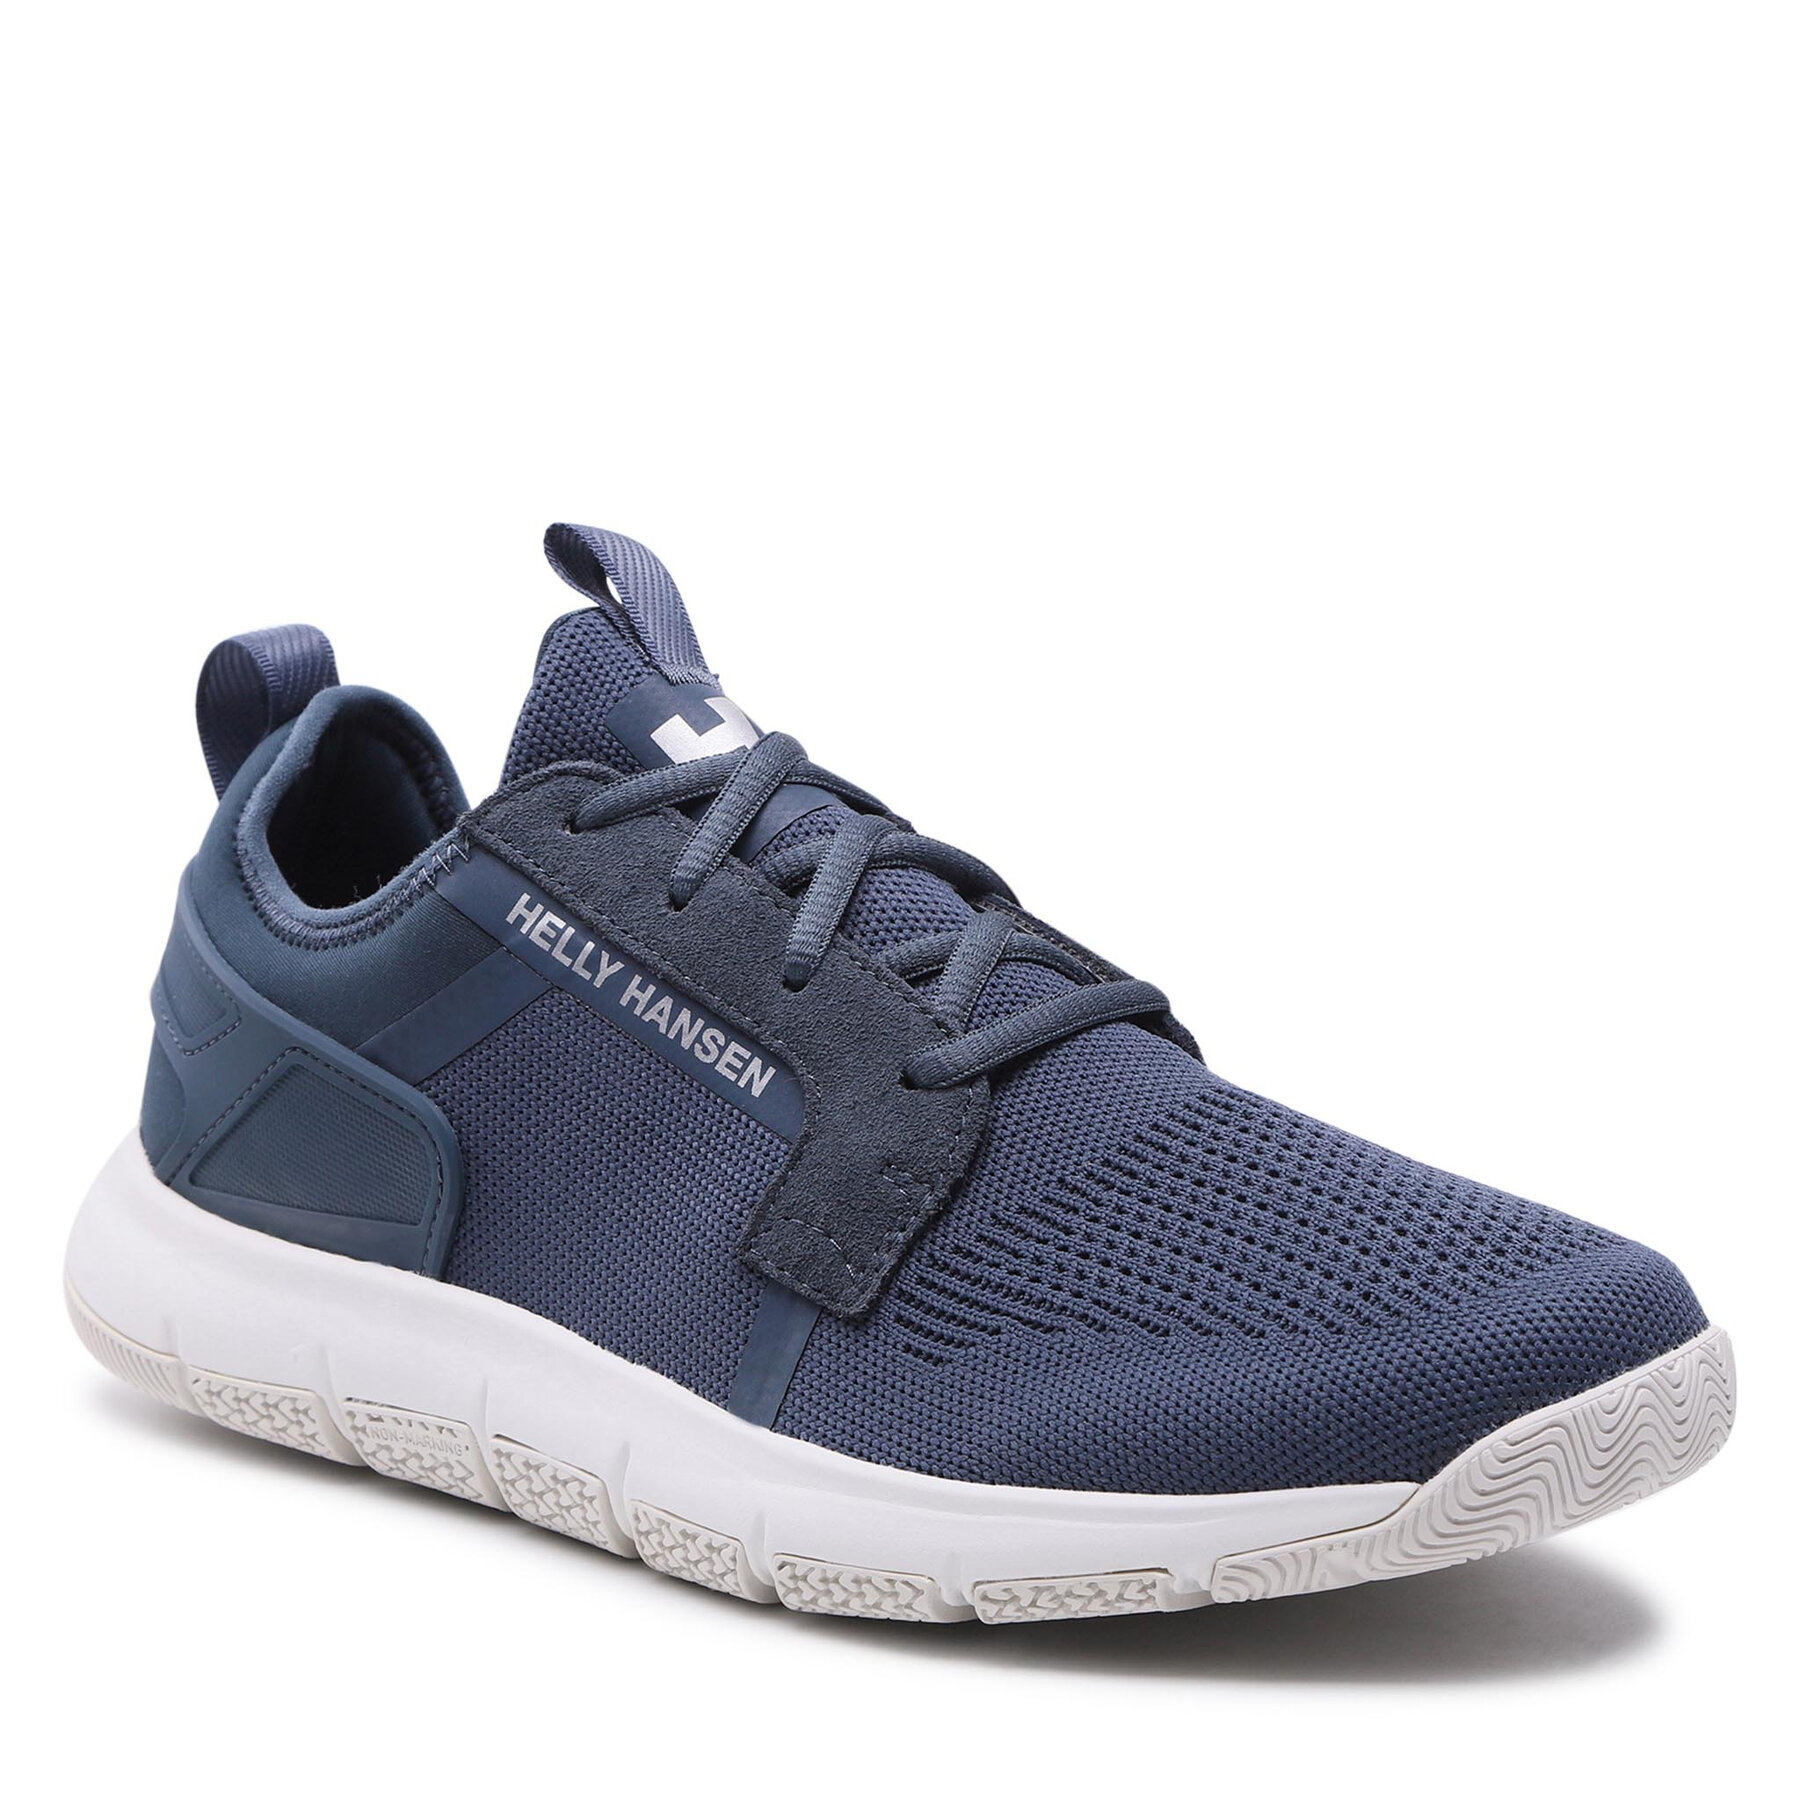 Sneakers Helly Hansen Henley 11704_635 Orion Blue/Off White 11704_635 imagine 2022 reducere